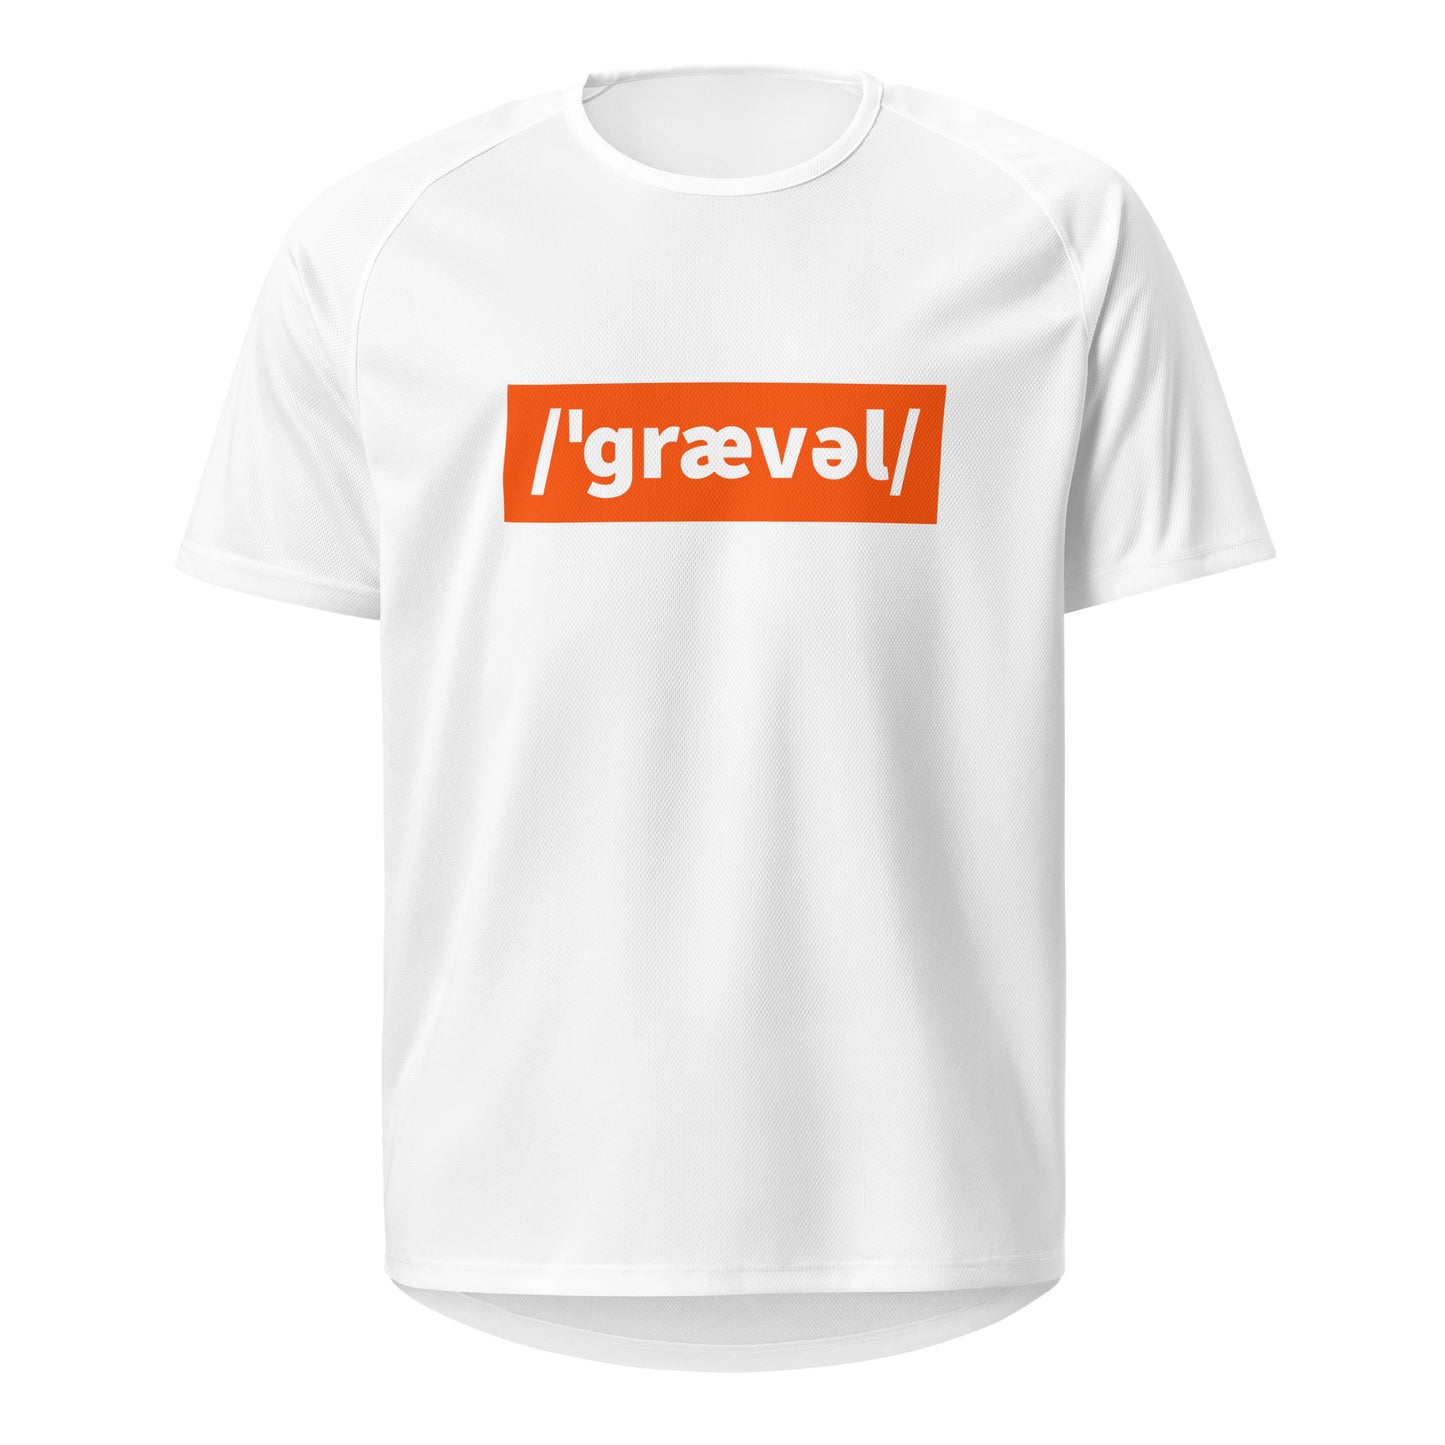 Gravel Cycling Sports Jersey, Adult Cyclist